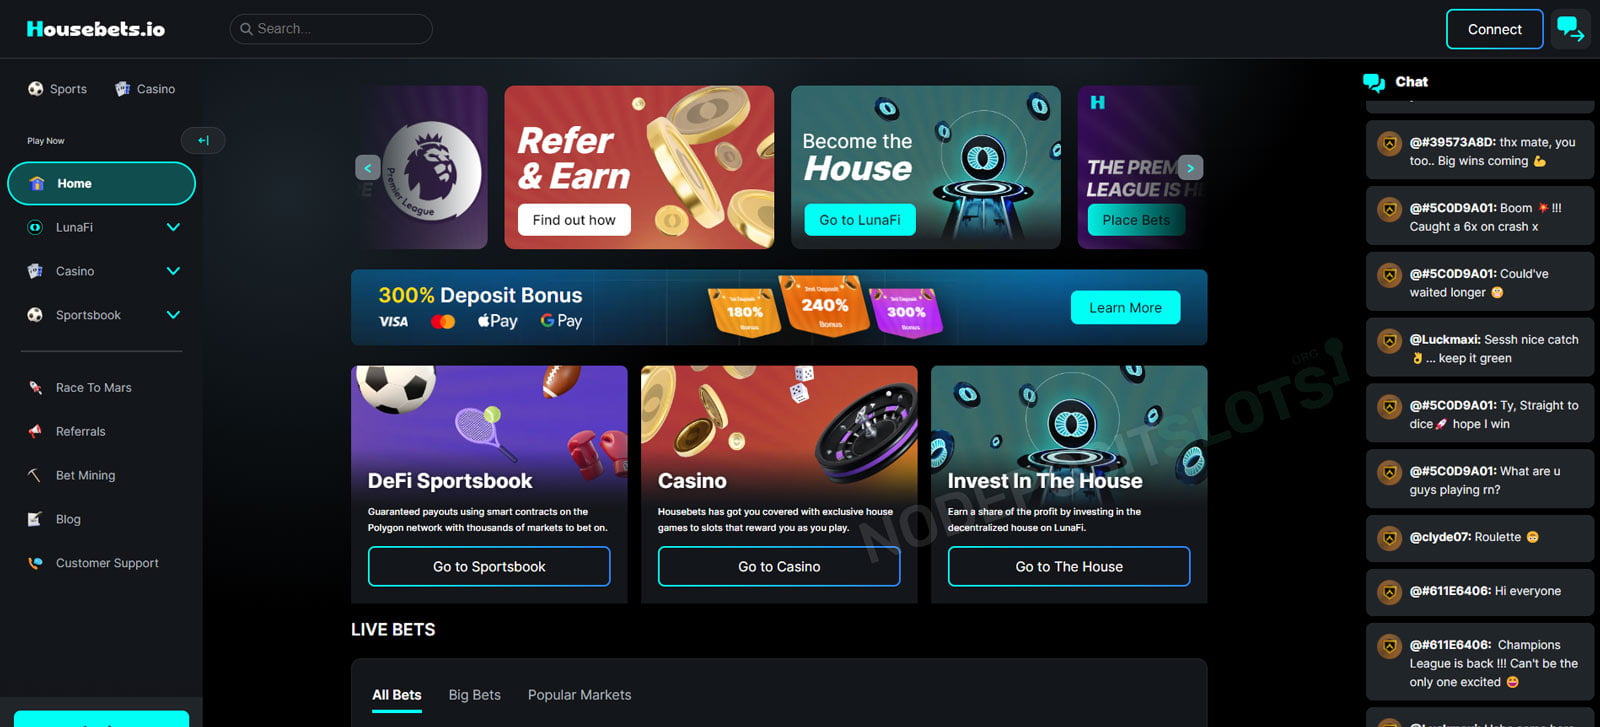 Houseofbets.io Online Casino Preview